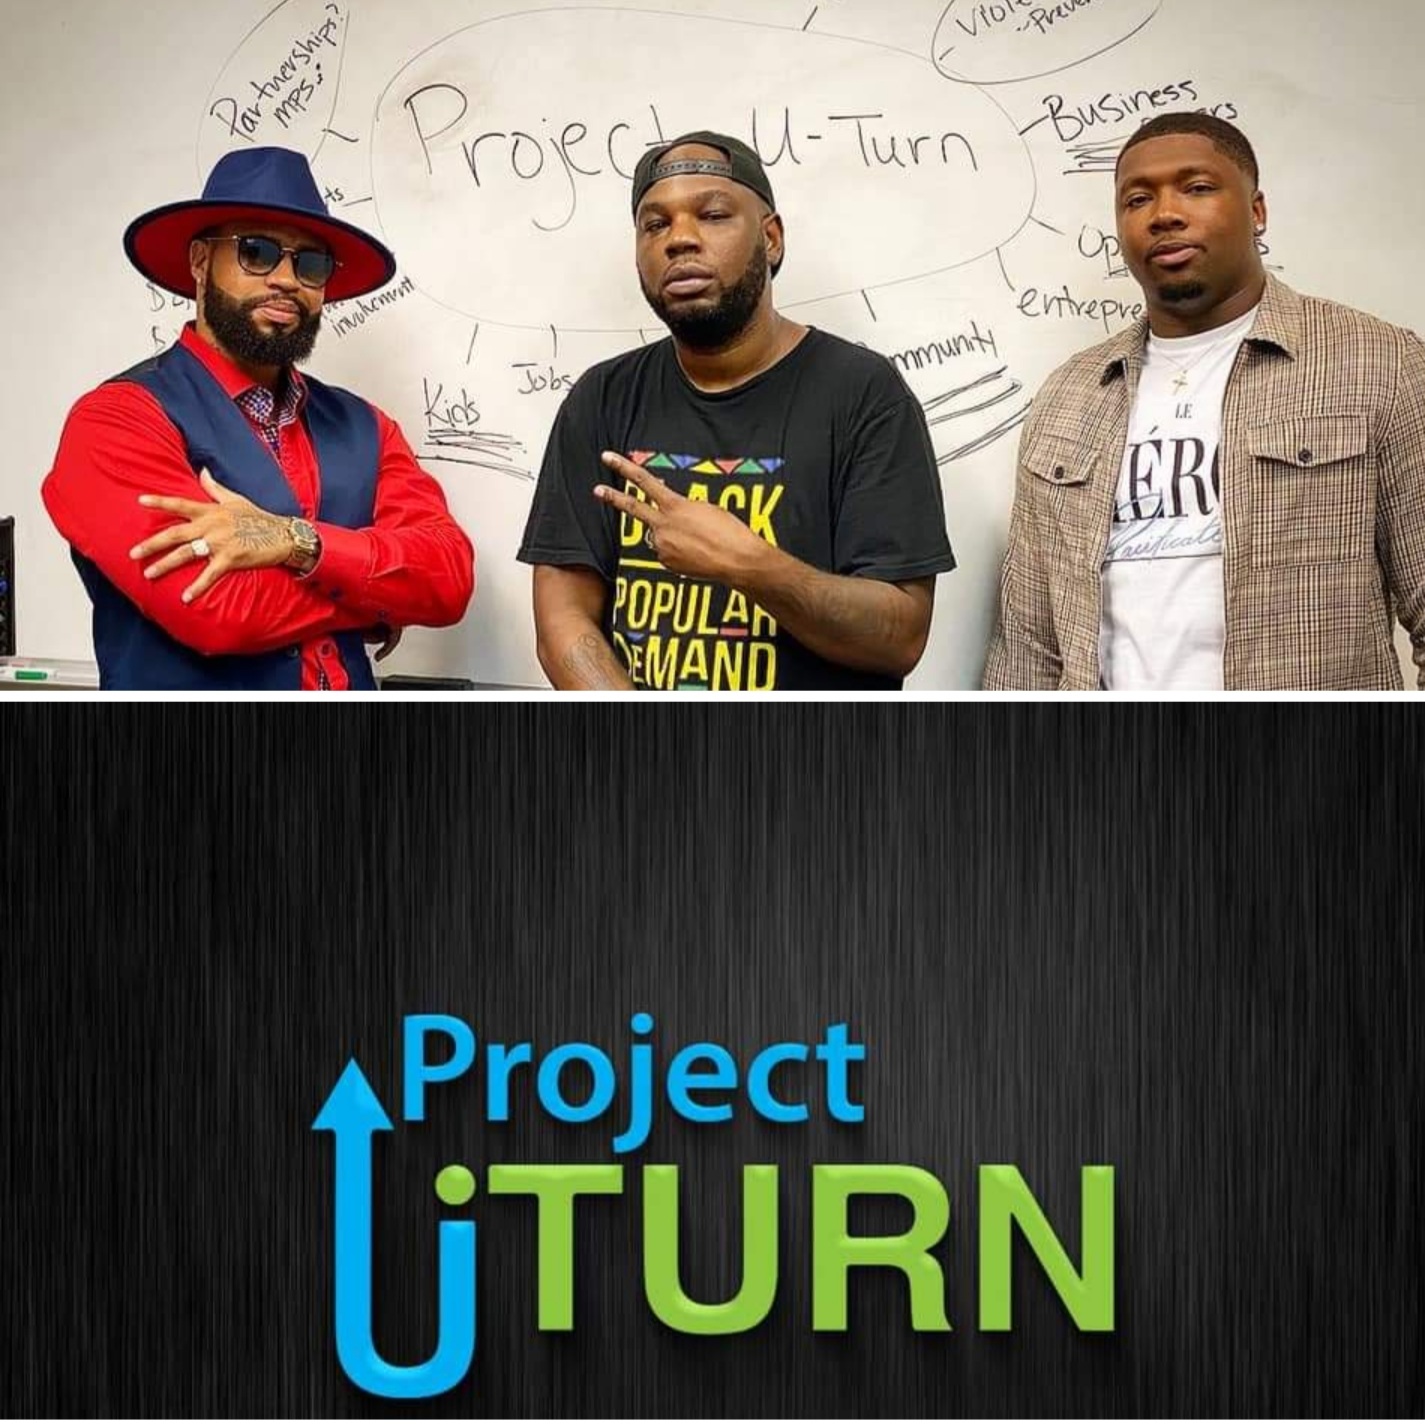 Princeton Epps encourages youth entrepreneurship with the launch of Project U Turn